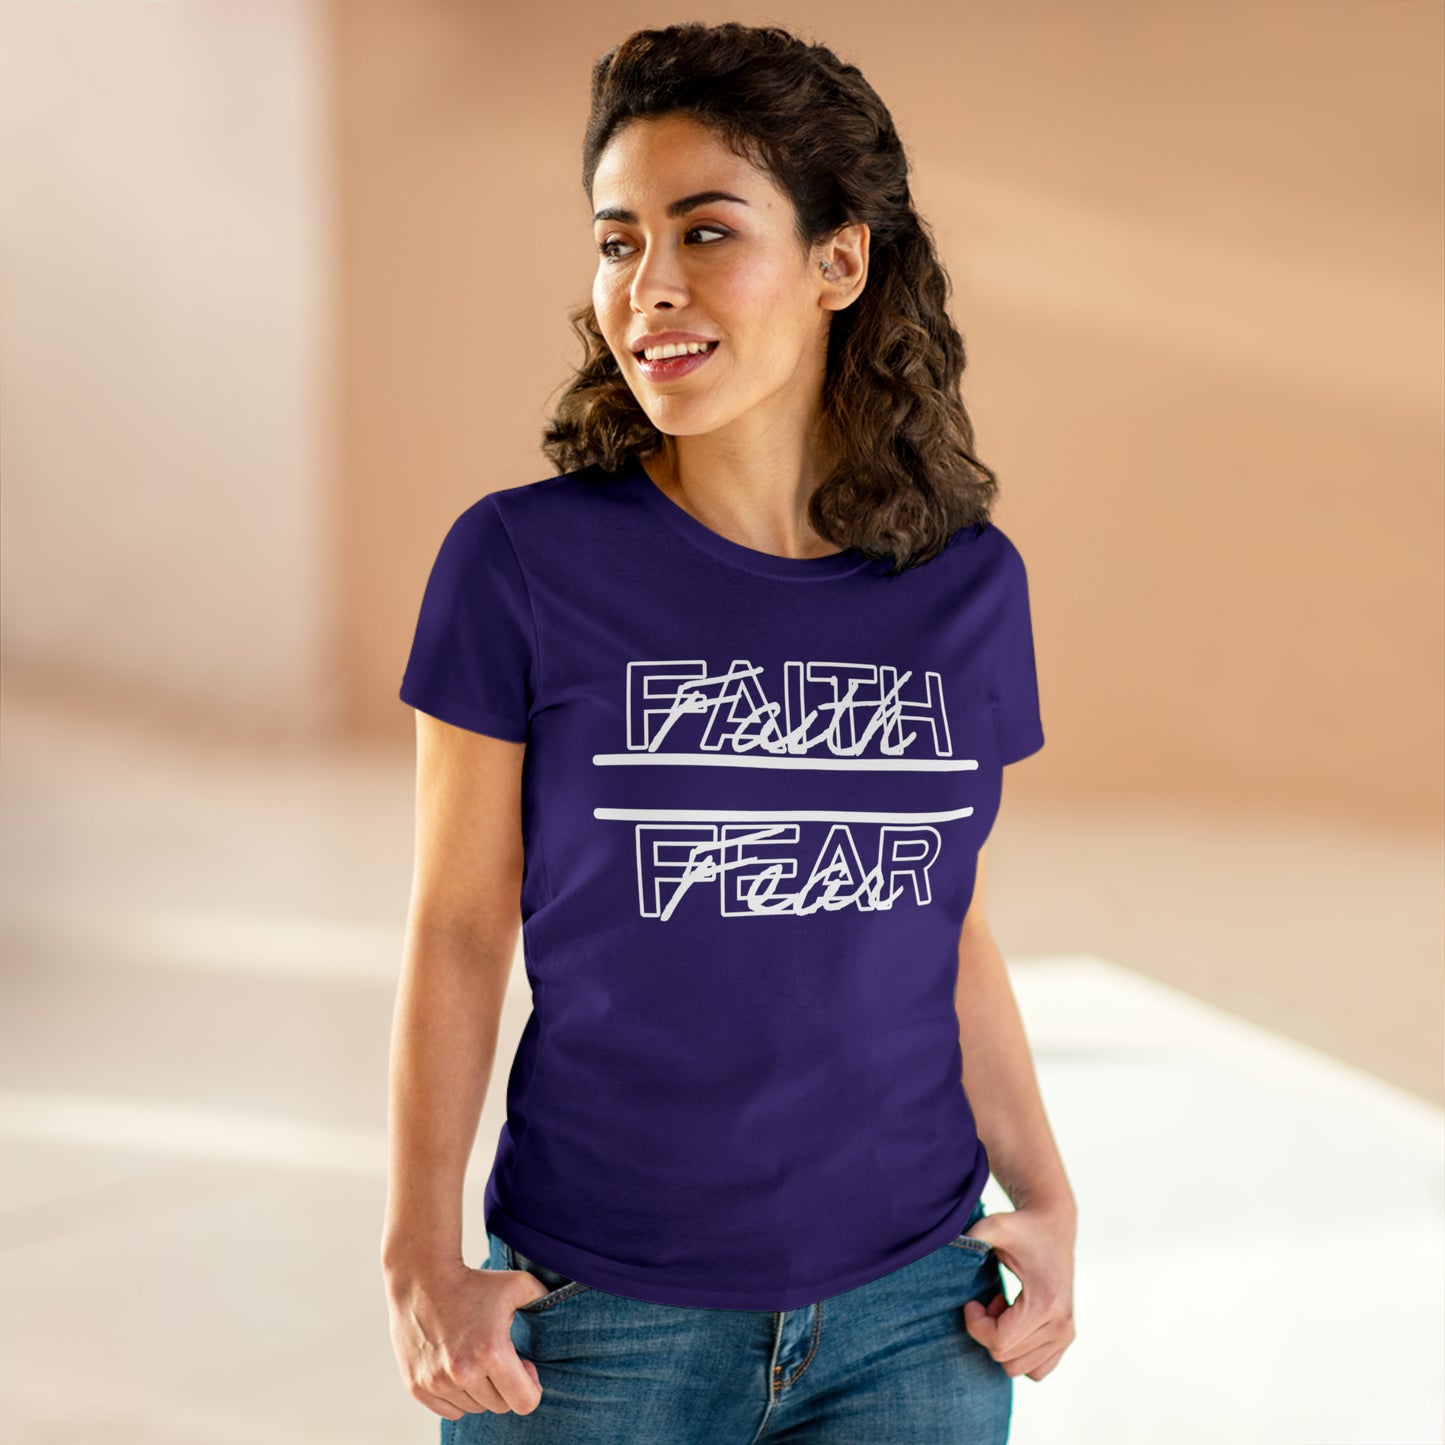 Faith Over Fear Ladies Bible Verse Shirt, Relaxed Fit Short Sleeve T-Shirt, Ladies Crewneck, Woman's Cotton Tee